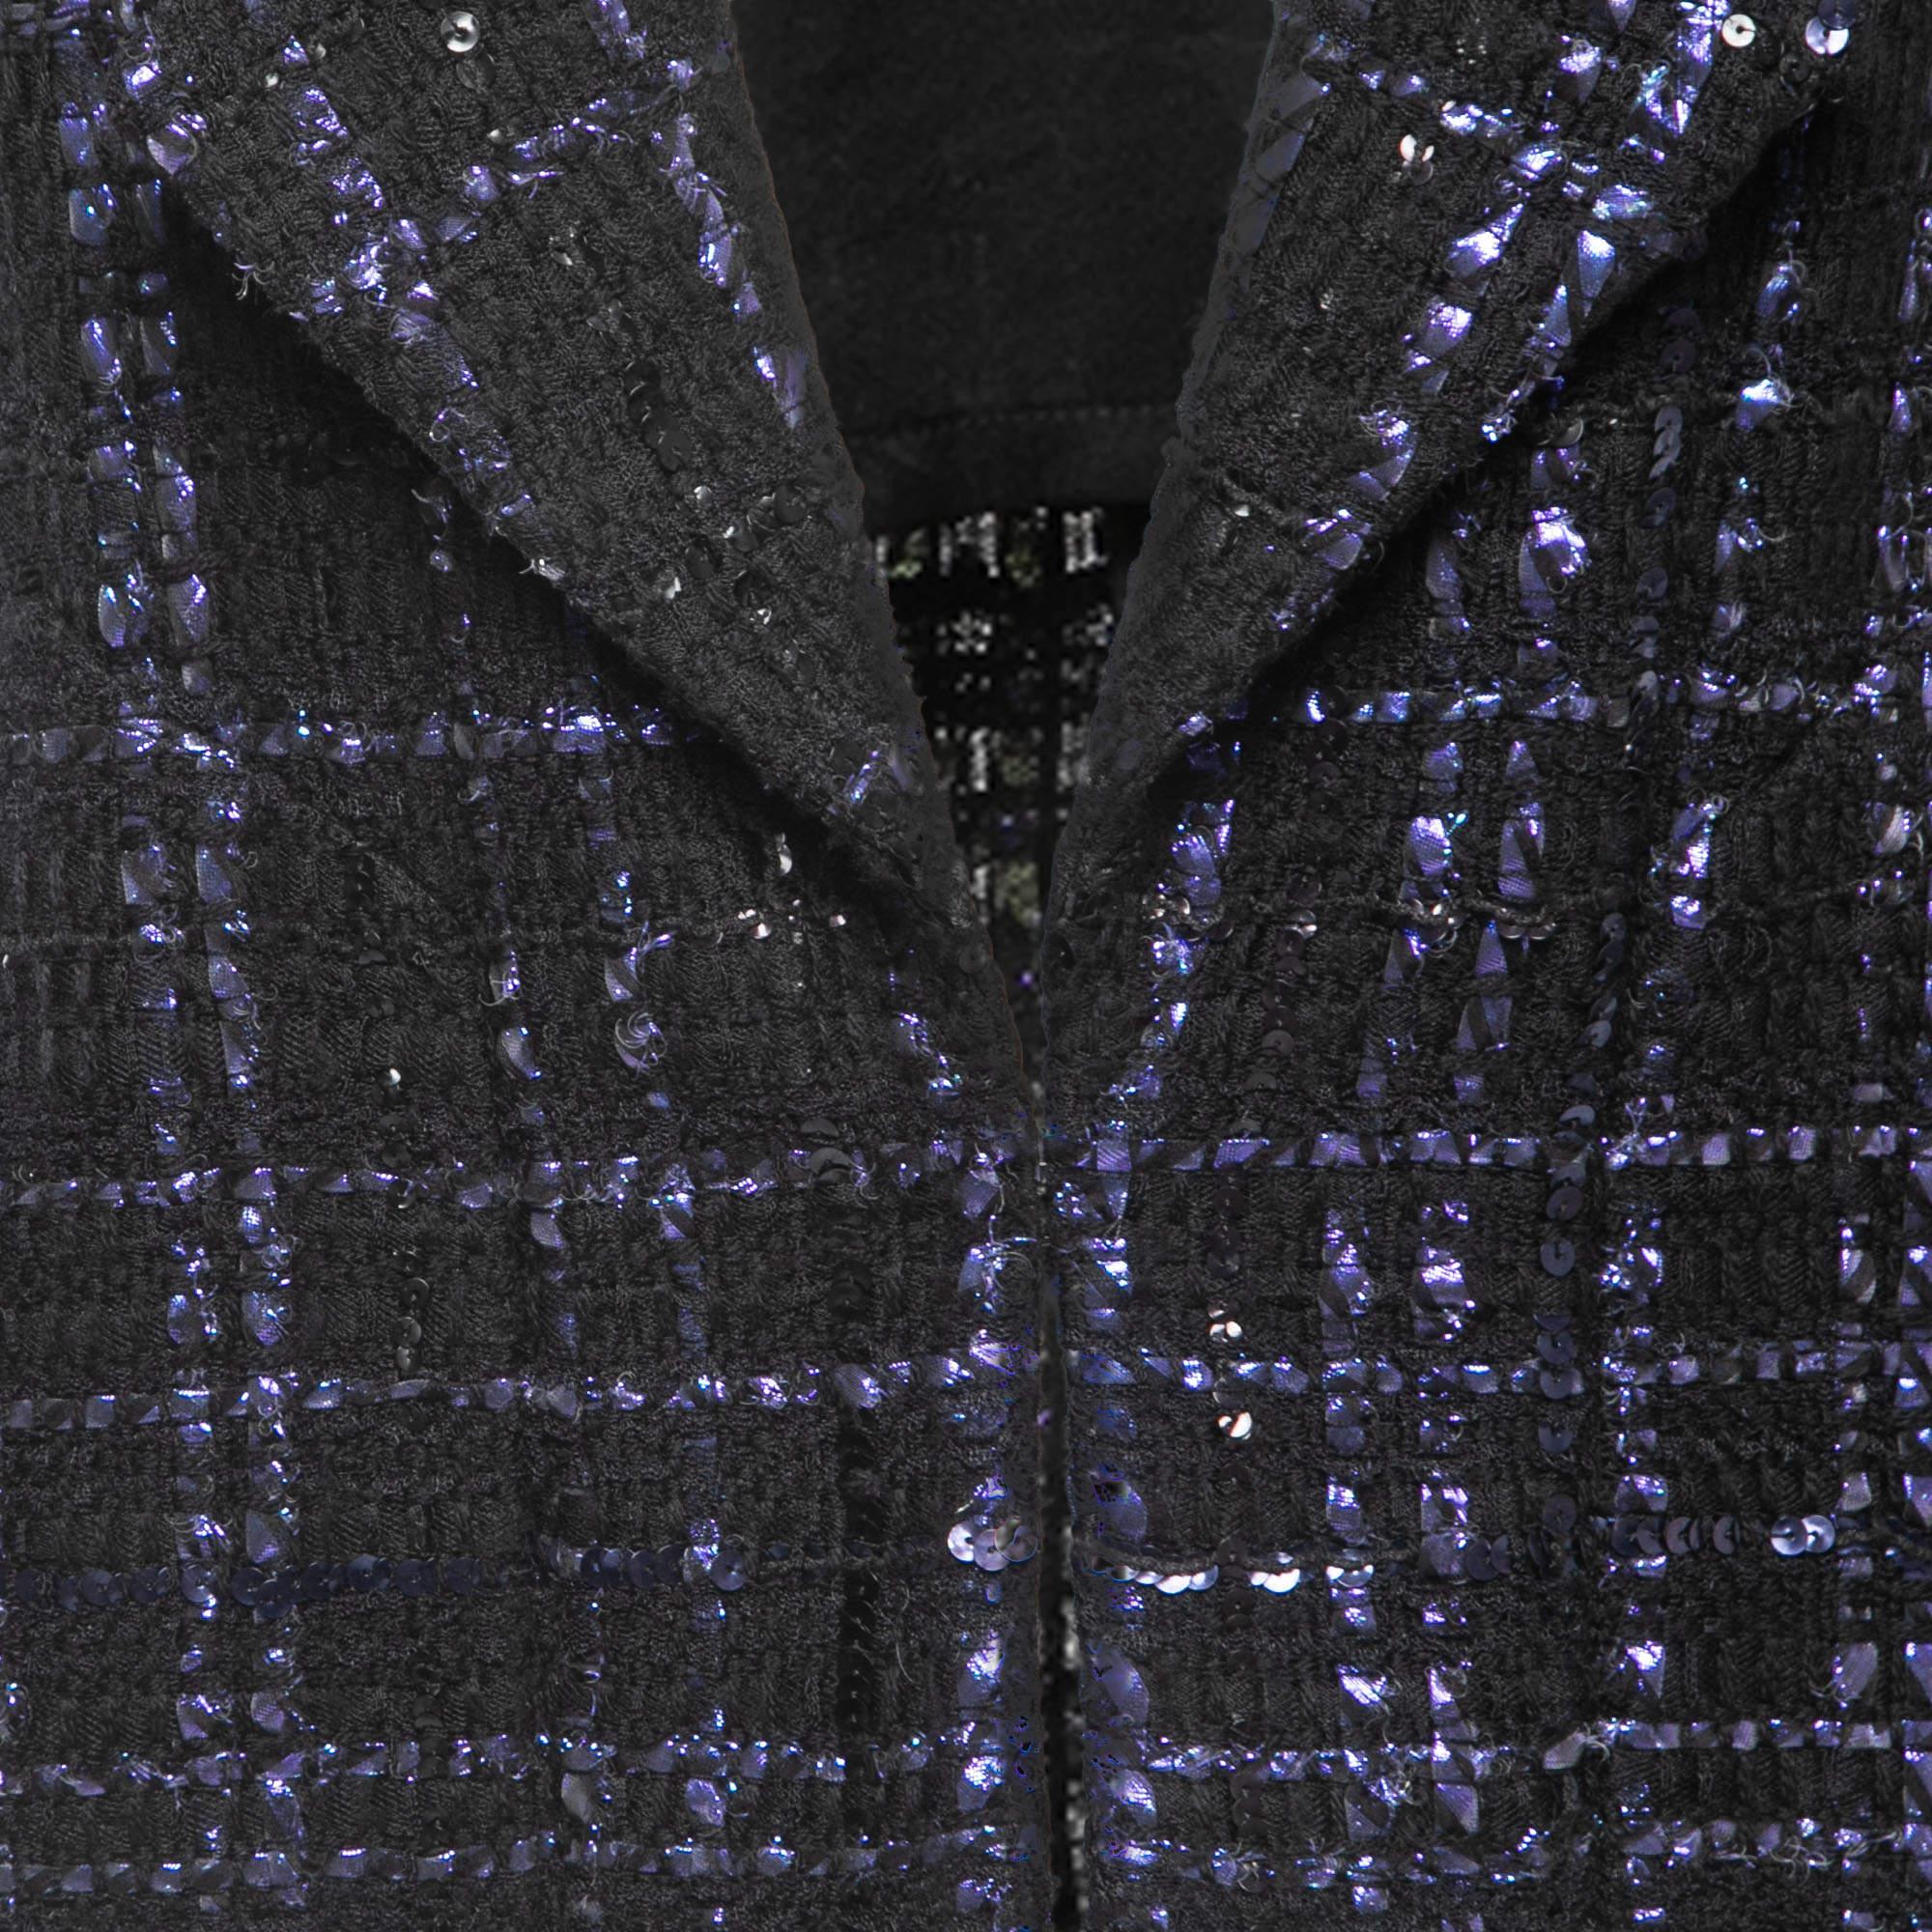 Chanel black lesage tweed jacket with interwoven metallic threads and rows of sequin from 2022 Fall Collection.
- CC buttons at cuffs
- full silk lining
Size mark 36 FR. Kept unworn.